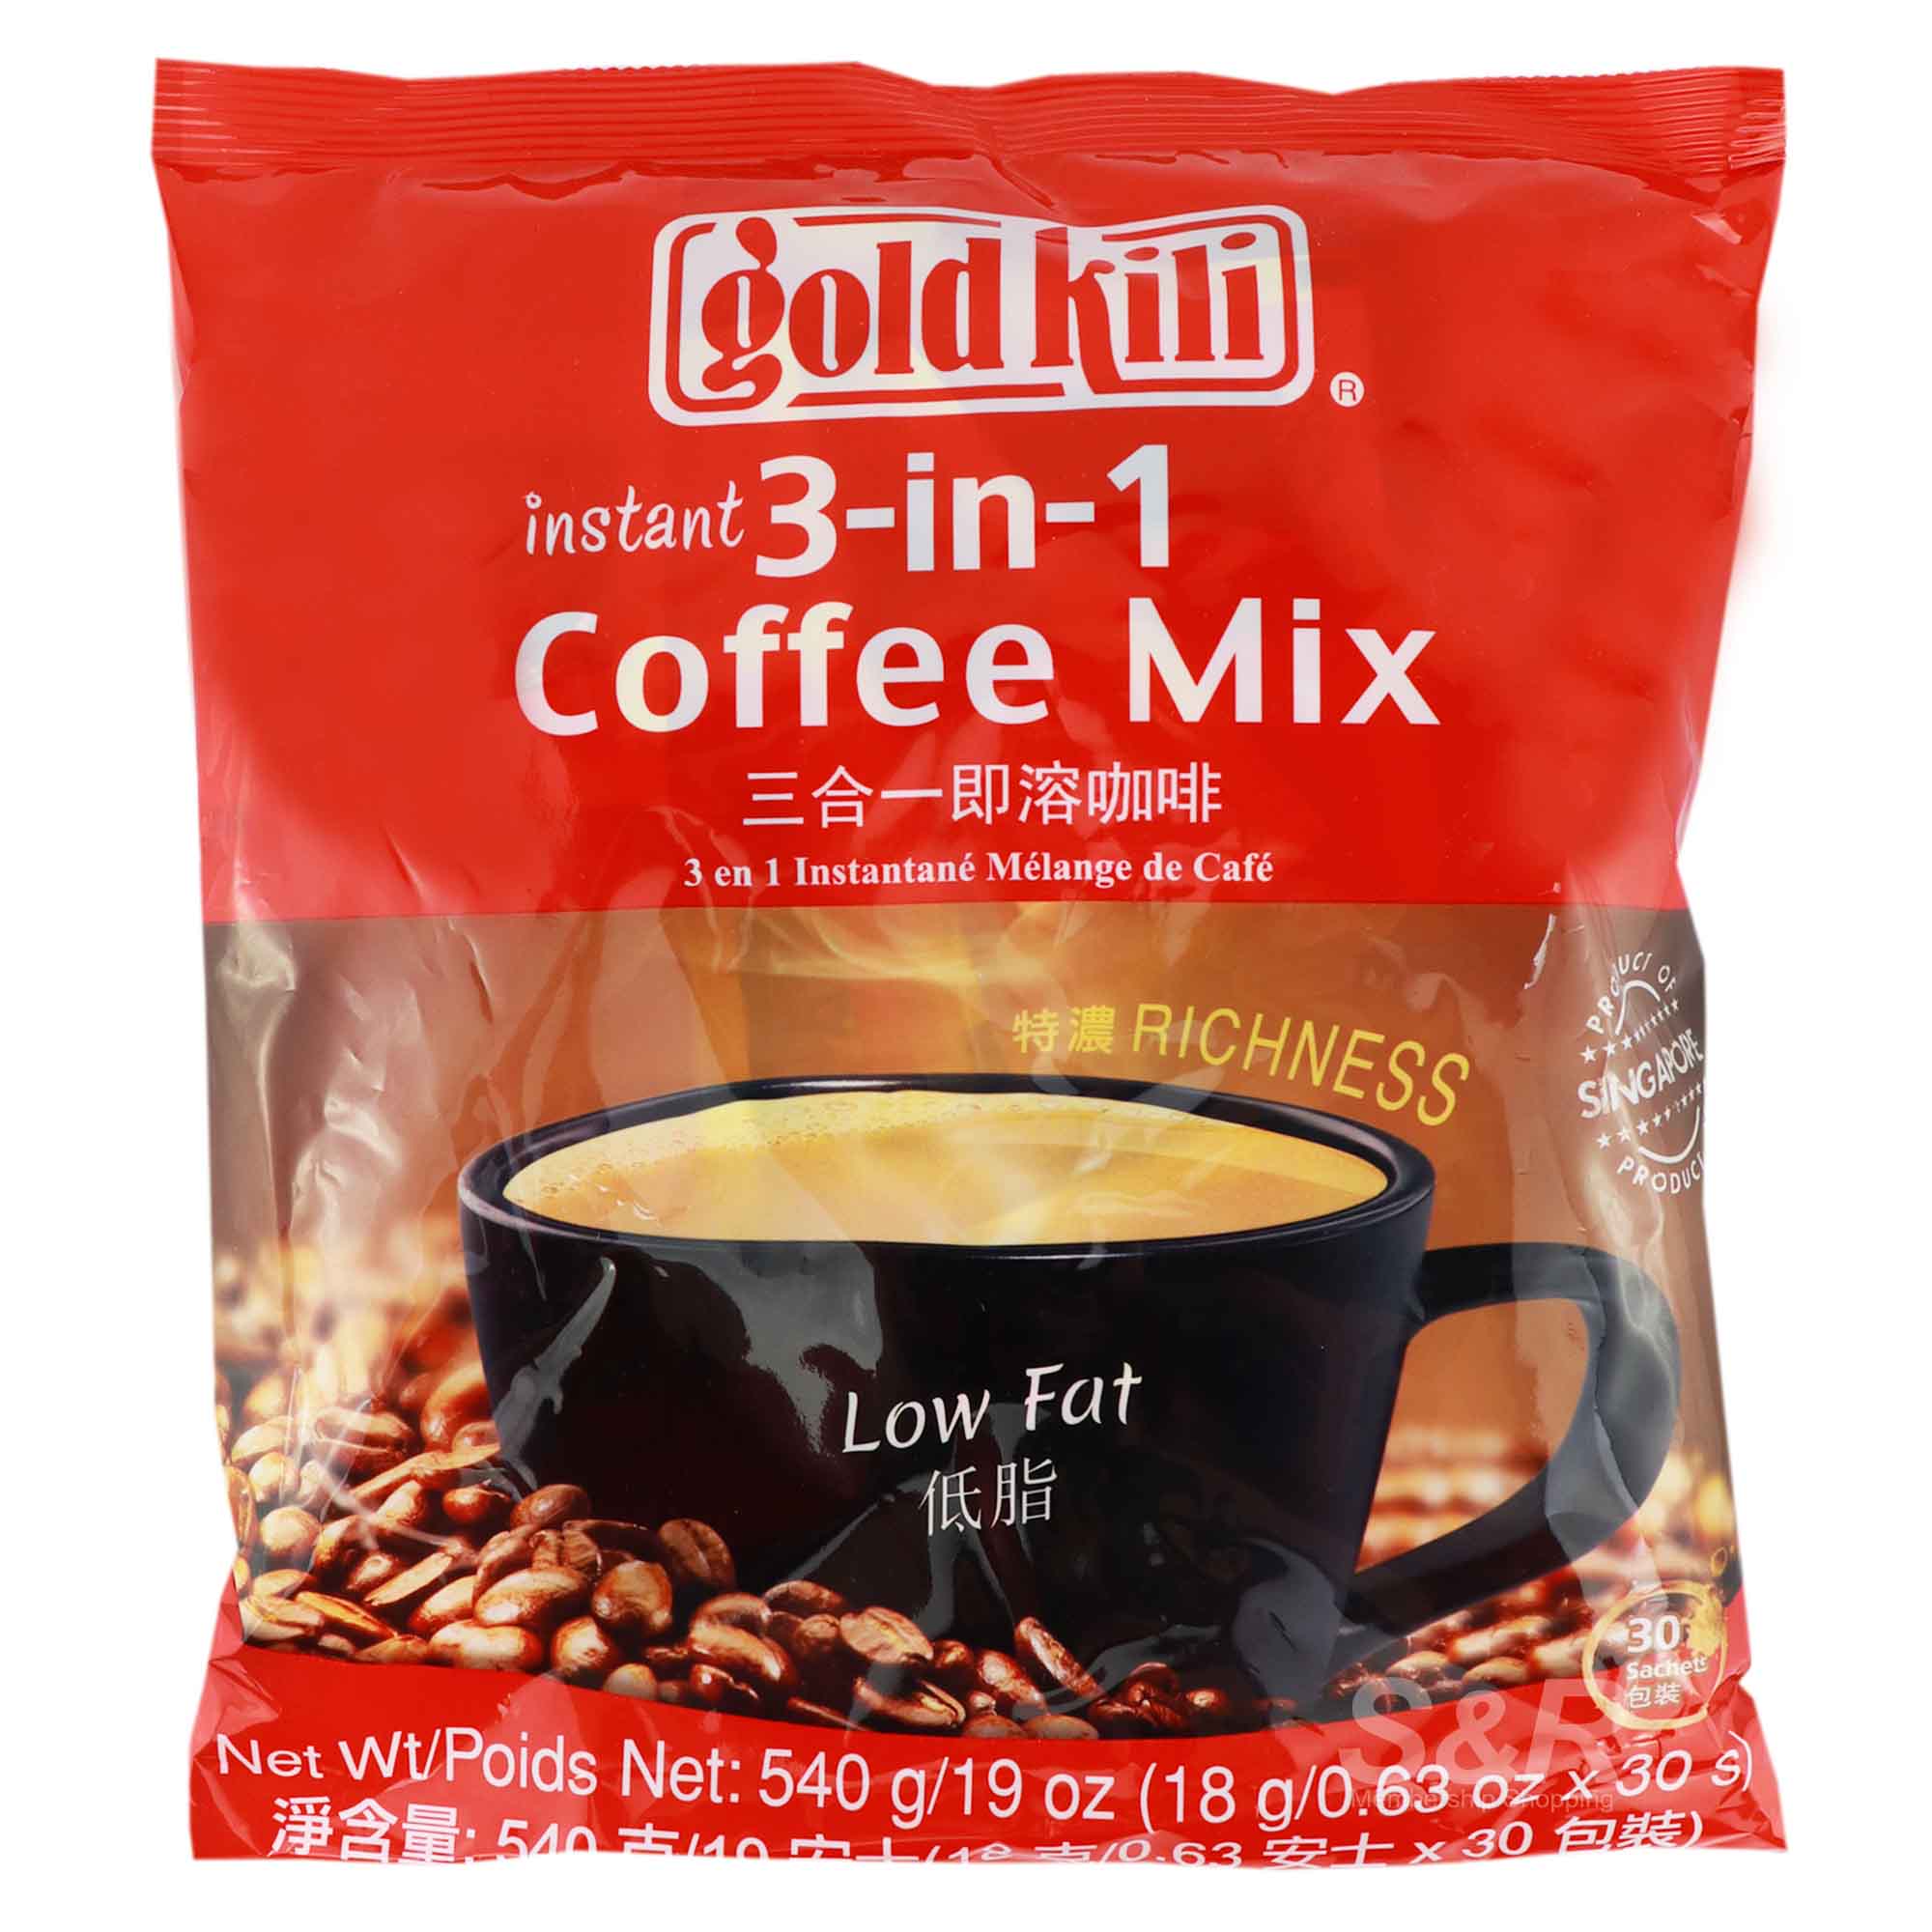 Gold Kili Instant 3-in-1 Coffee Mix 30 sachets